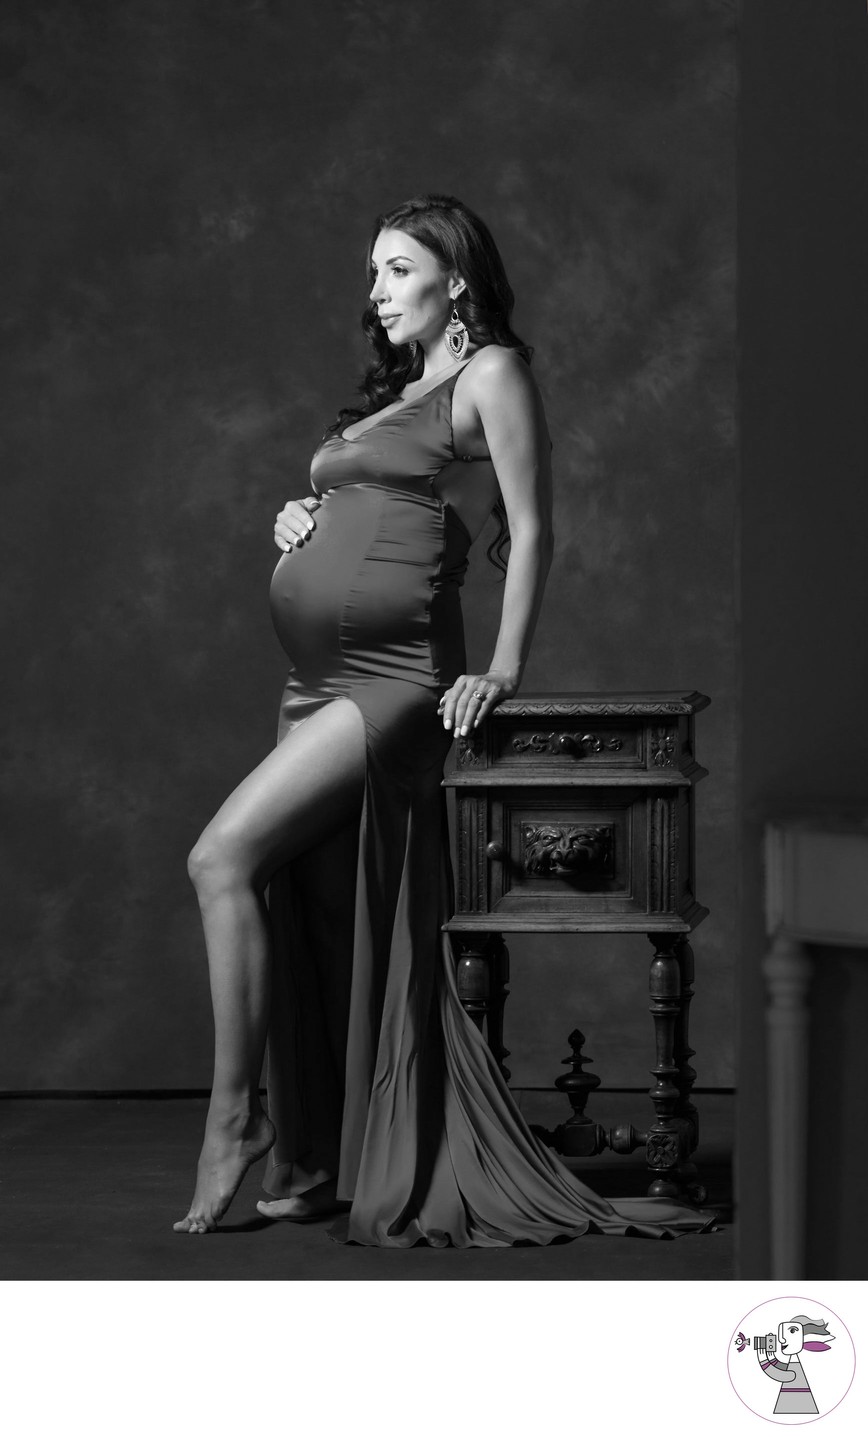 Radiant Maternity Portrait of a Beautiful Mother-to-Be